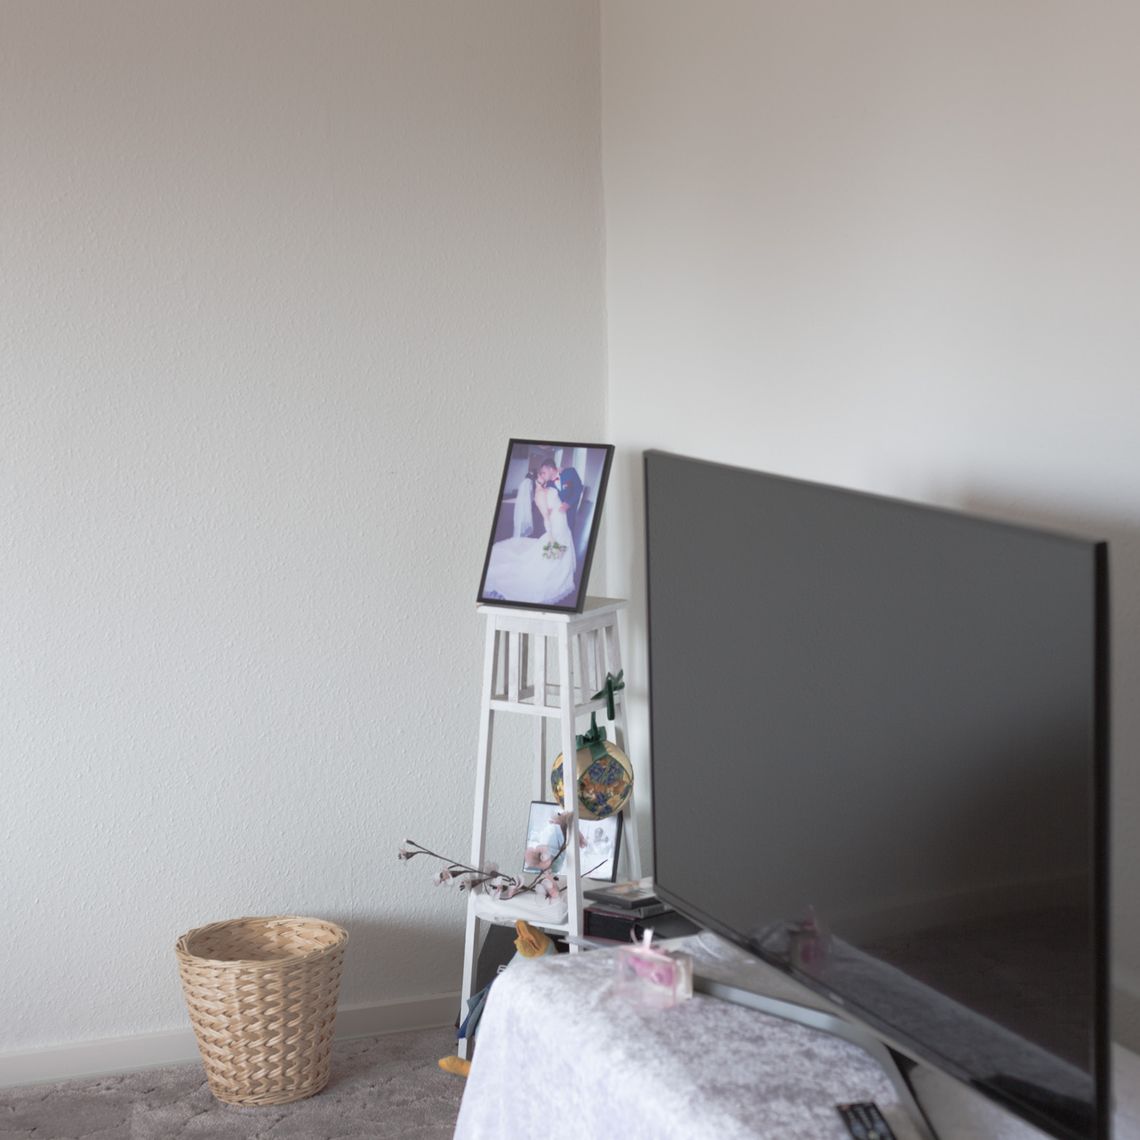 A television and a wedding photo in the corner of a white room.